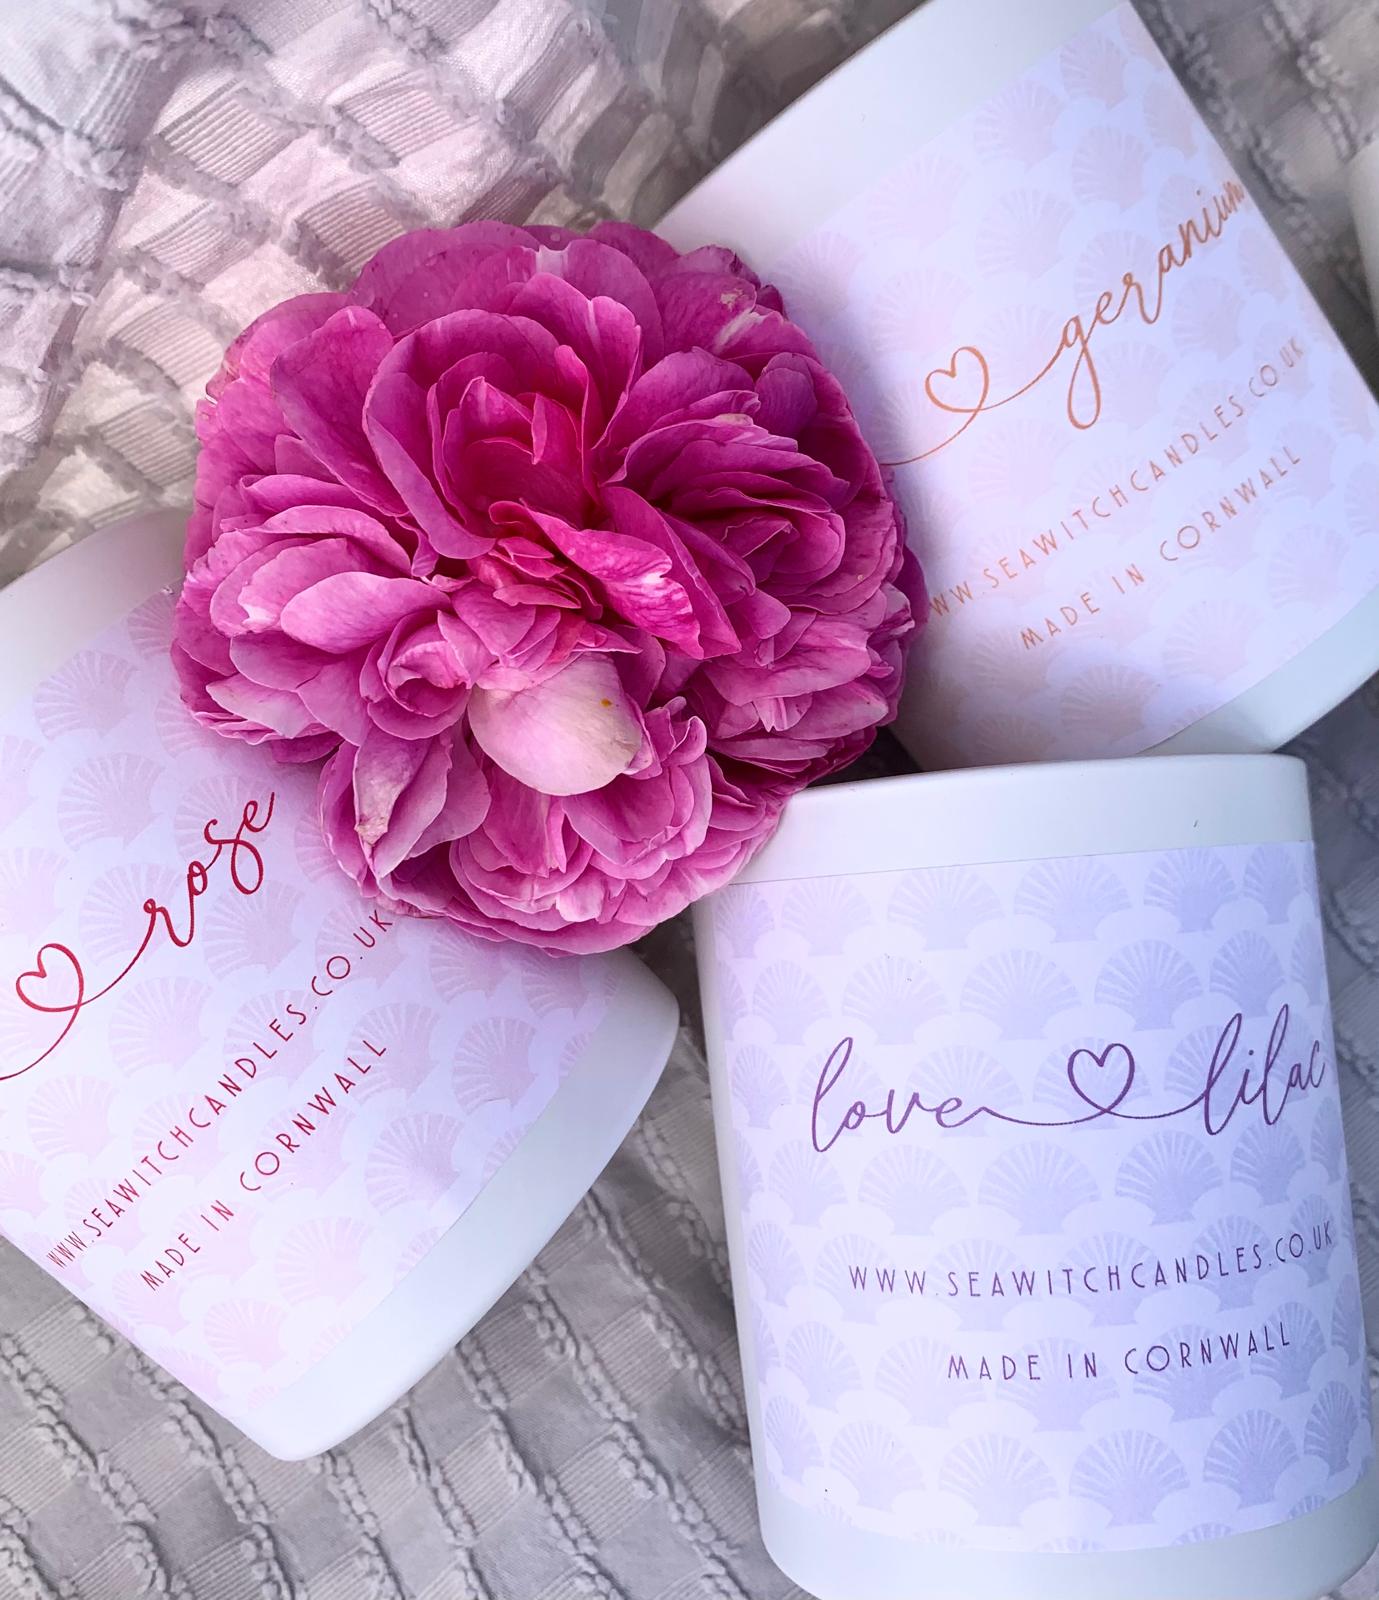 Love Rose Candle  £22  Beautiful Rose Scented Candle  Burn time of at least 50 hours   Ingredients: natural vegan plant wax, fragrance oils, cotton wick   This candle is hand poured into a white china pot and is made in Mousehole, Cornwall by Seawitch Candles